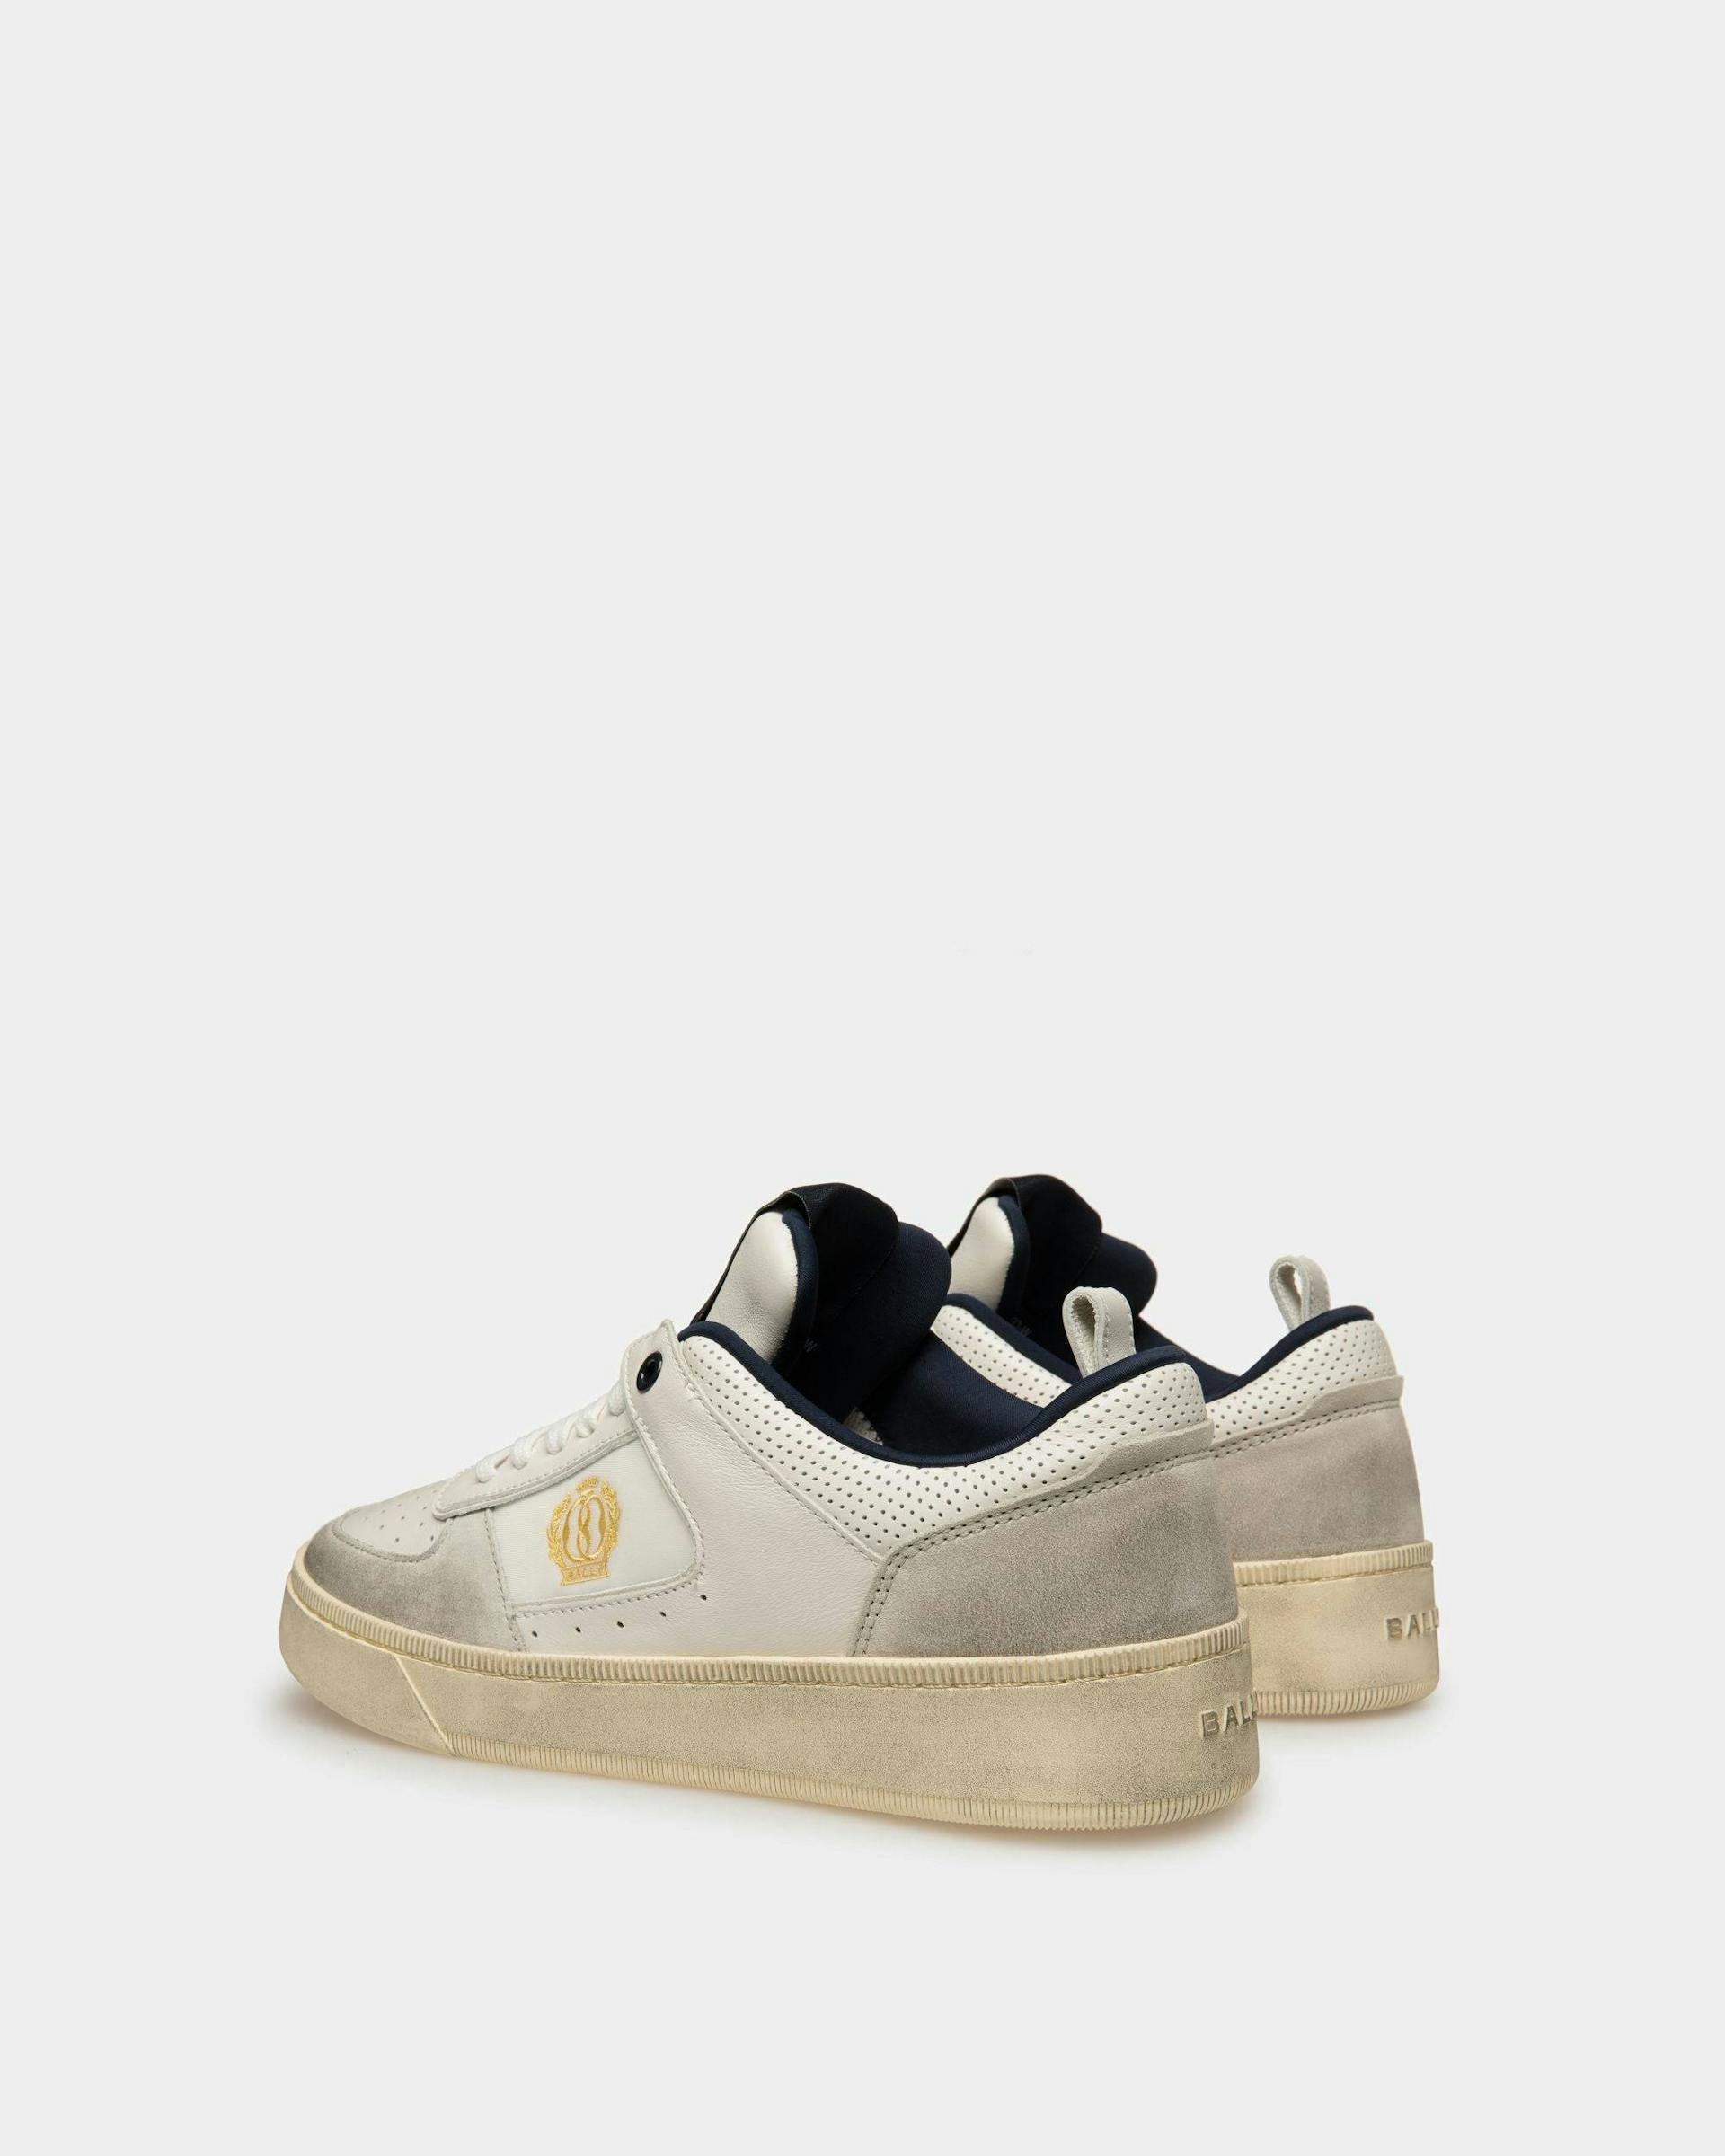 Women's Raise Sneakers In Dusty White And Midnight Leather | Bally | Still Life 3/4 Back